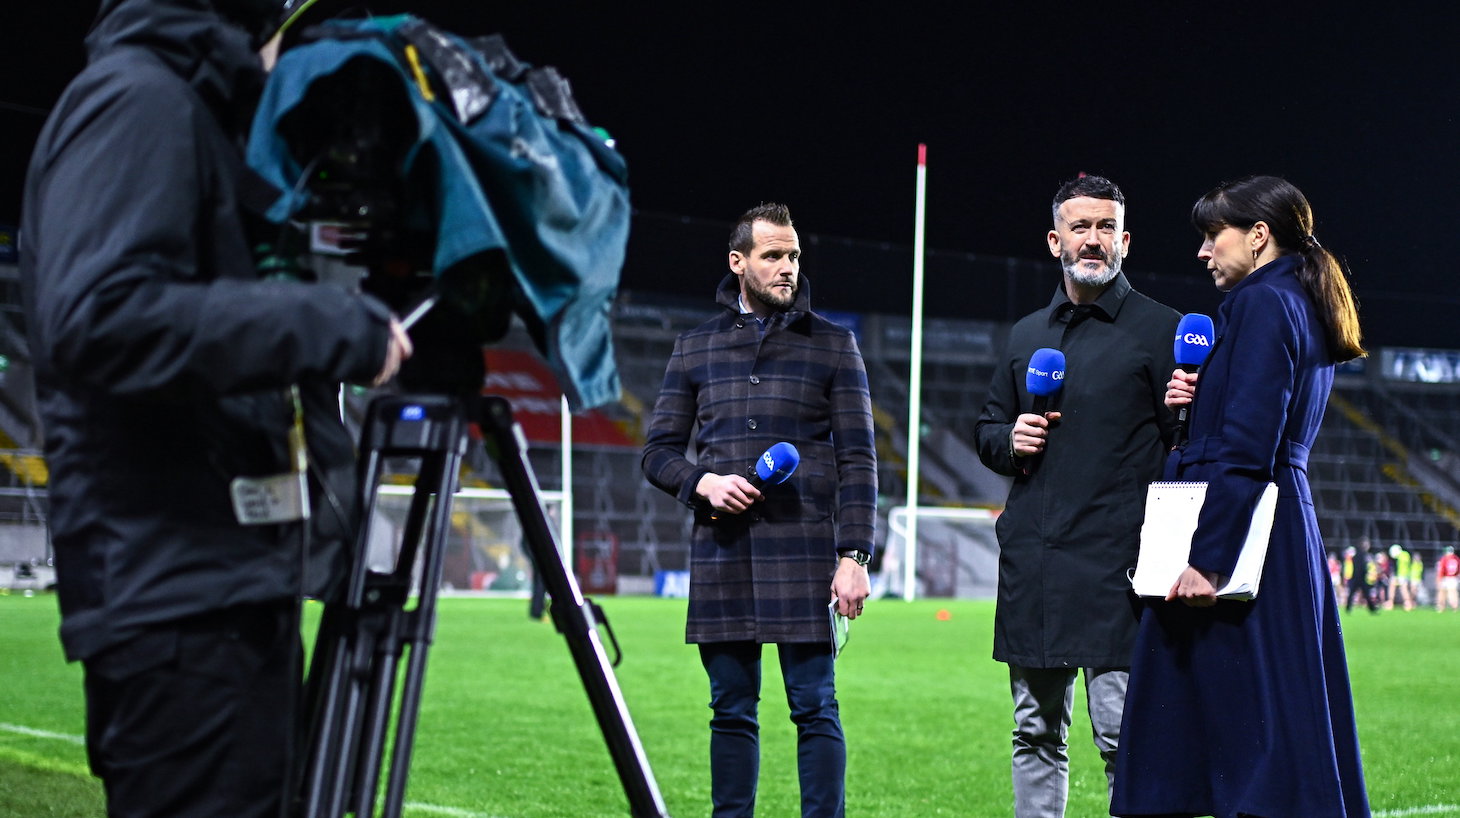 RTÉ analyst team, from left, Jackie Tyrell, Dónal Óg Cusack and Joanne Cantwell at half-time during the Allianz Hurling League Division 1 Group A match between Cork and Kilkenny at SuperValu Páirc Ui Chaoimh in Cork.